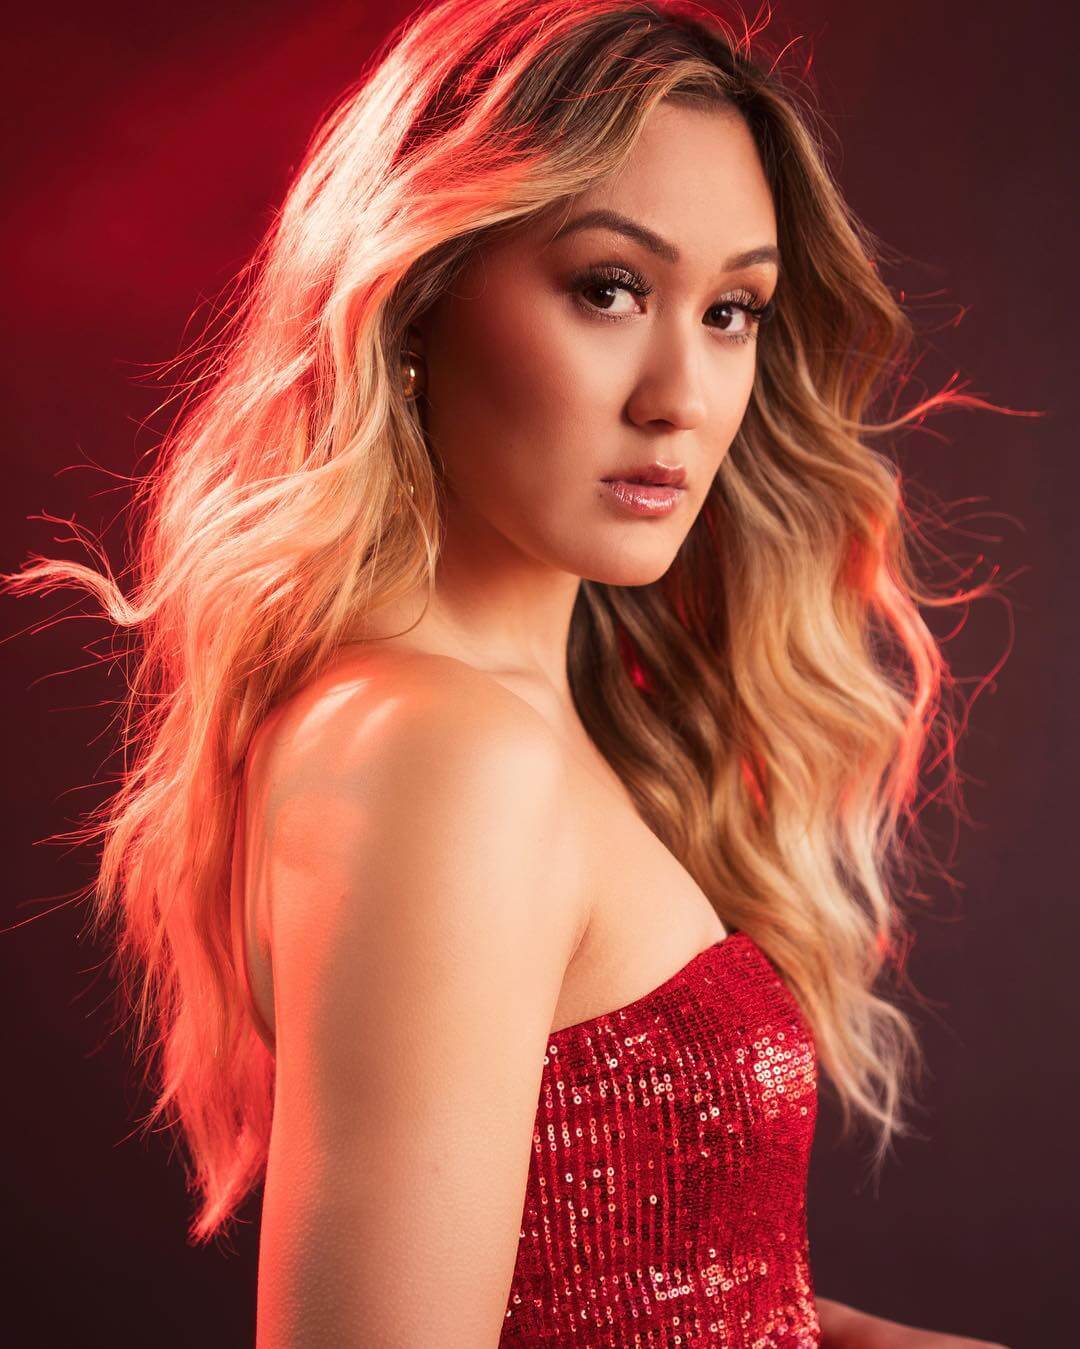 51 Hottest LaurDIY Big Butt Pictures Which Will Make You Swelter All Over 40